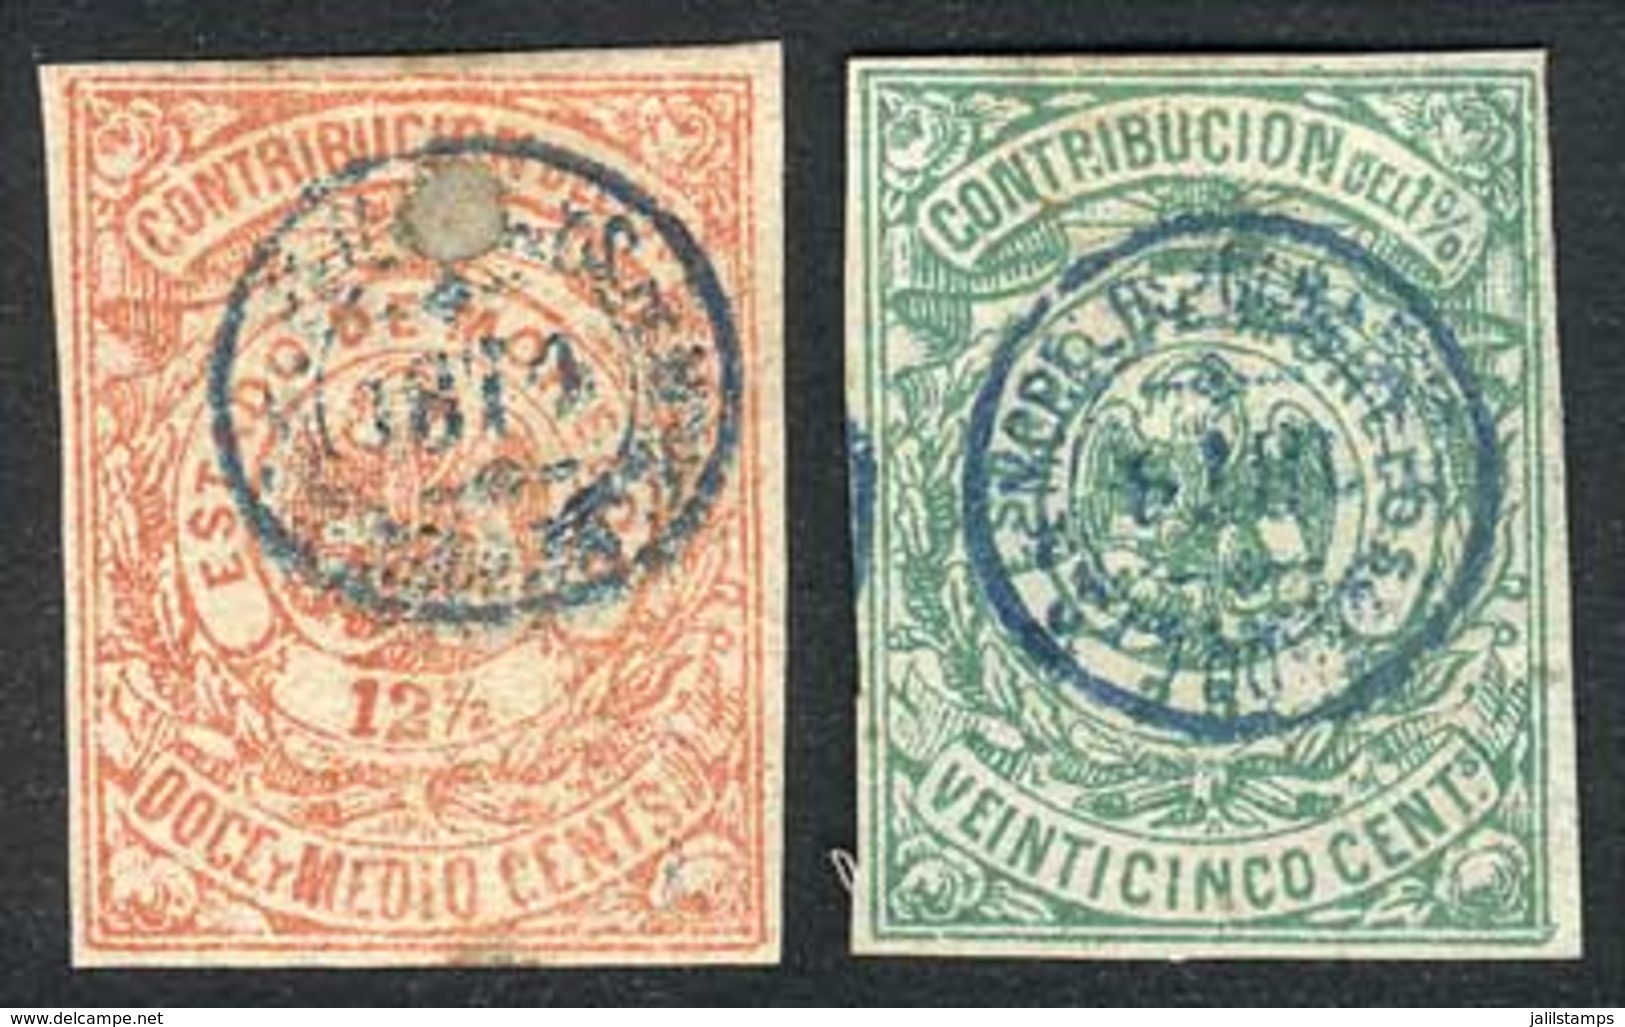 MEXICO: STATE OF MORELOS: Contribución 1%, Year 1871, 2 Stamps Of 12½ And 25c., VF Quality! - Mexiko